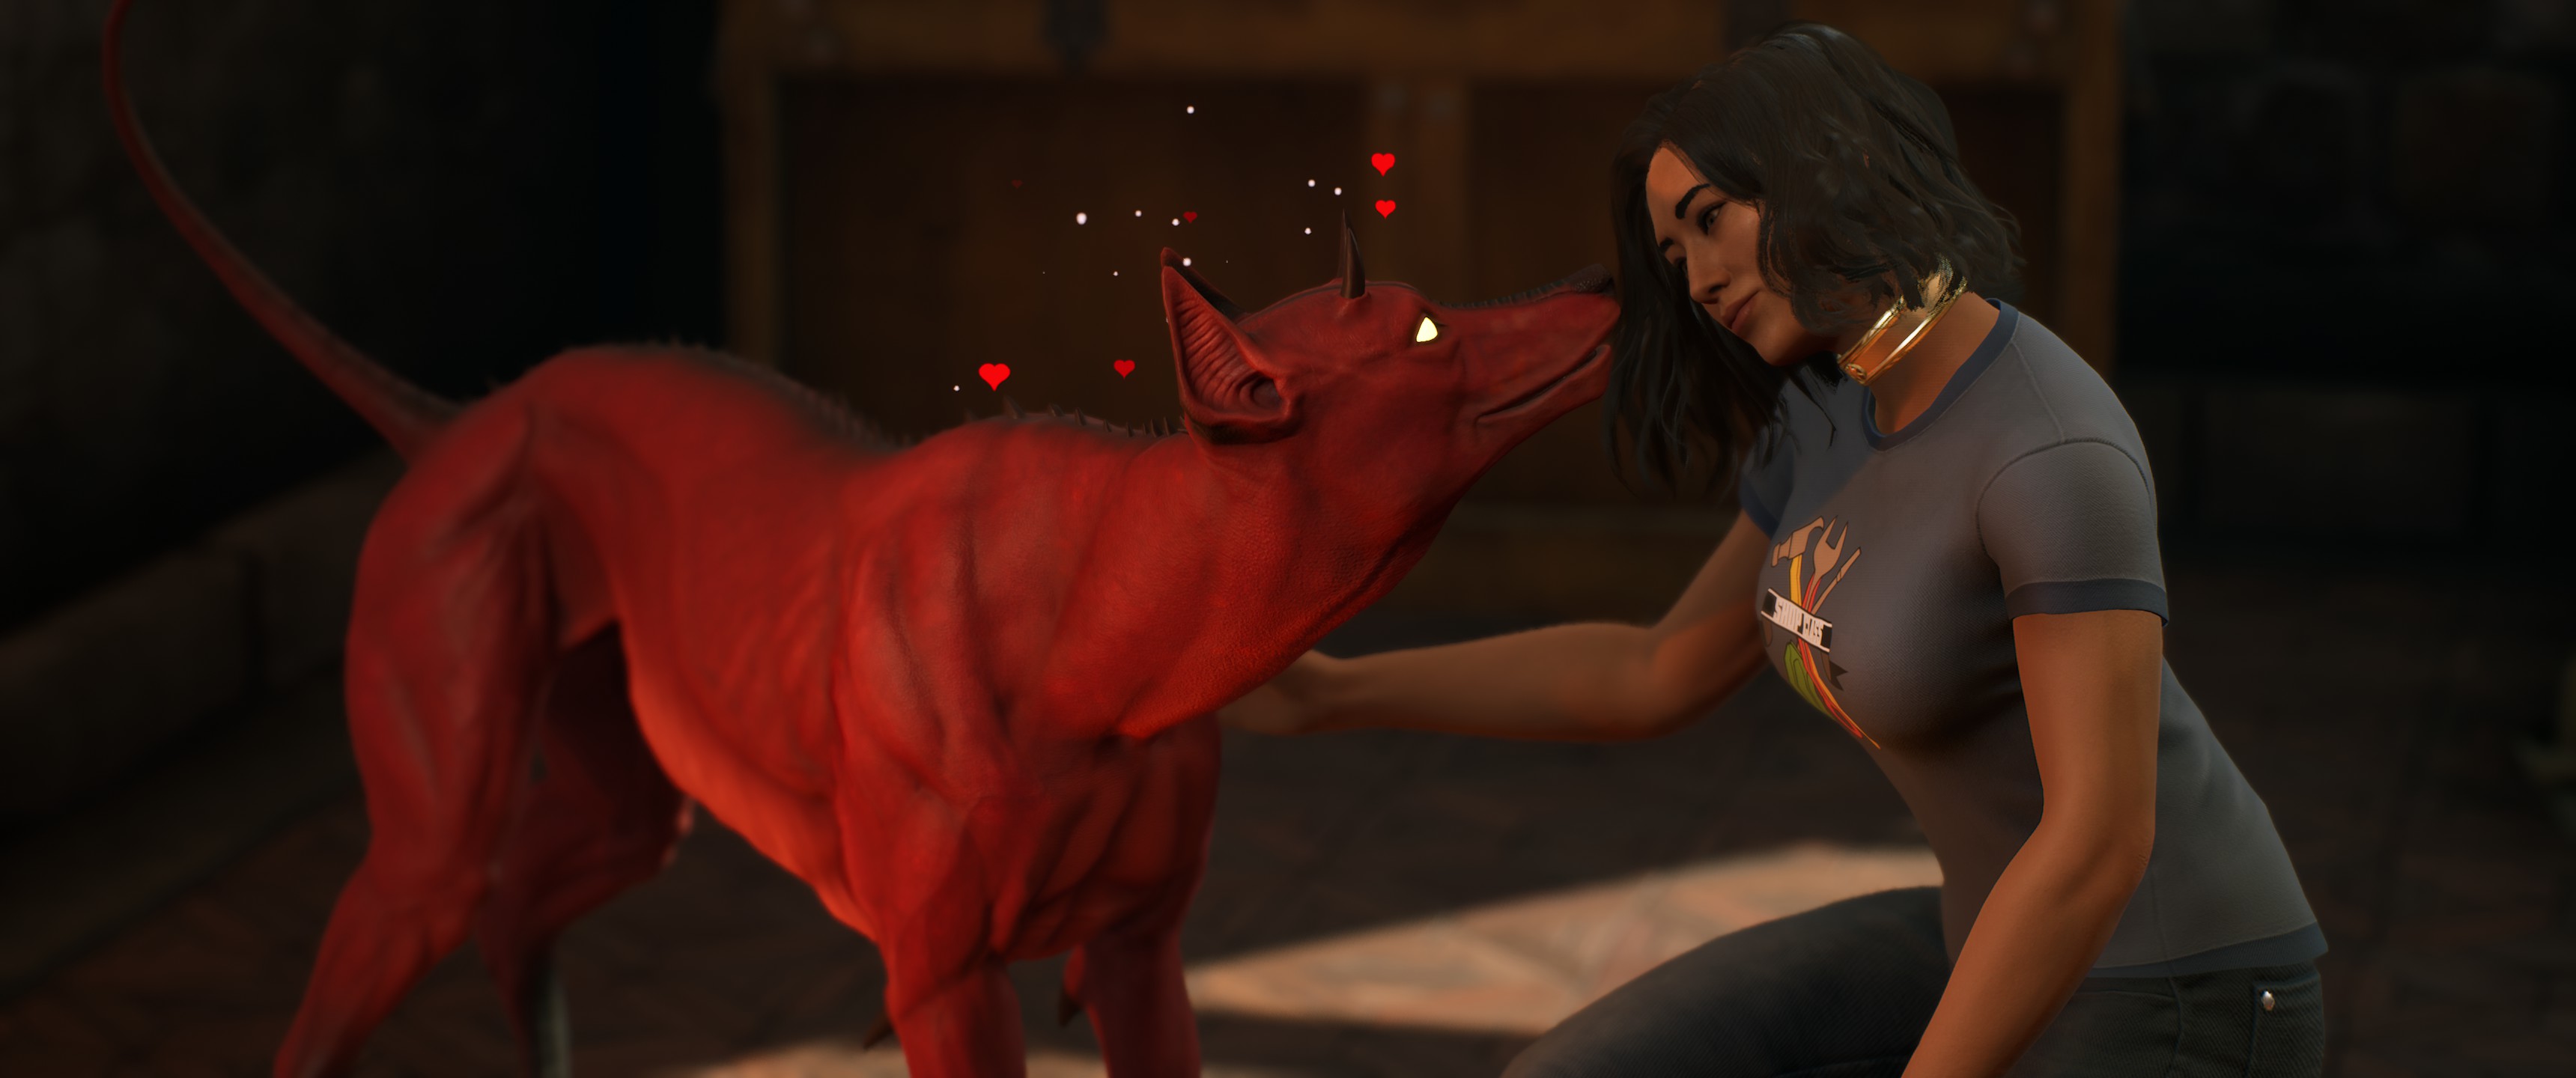  Petting a dog in a videogame has never been more important than in Midnight Suns 